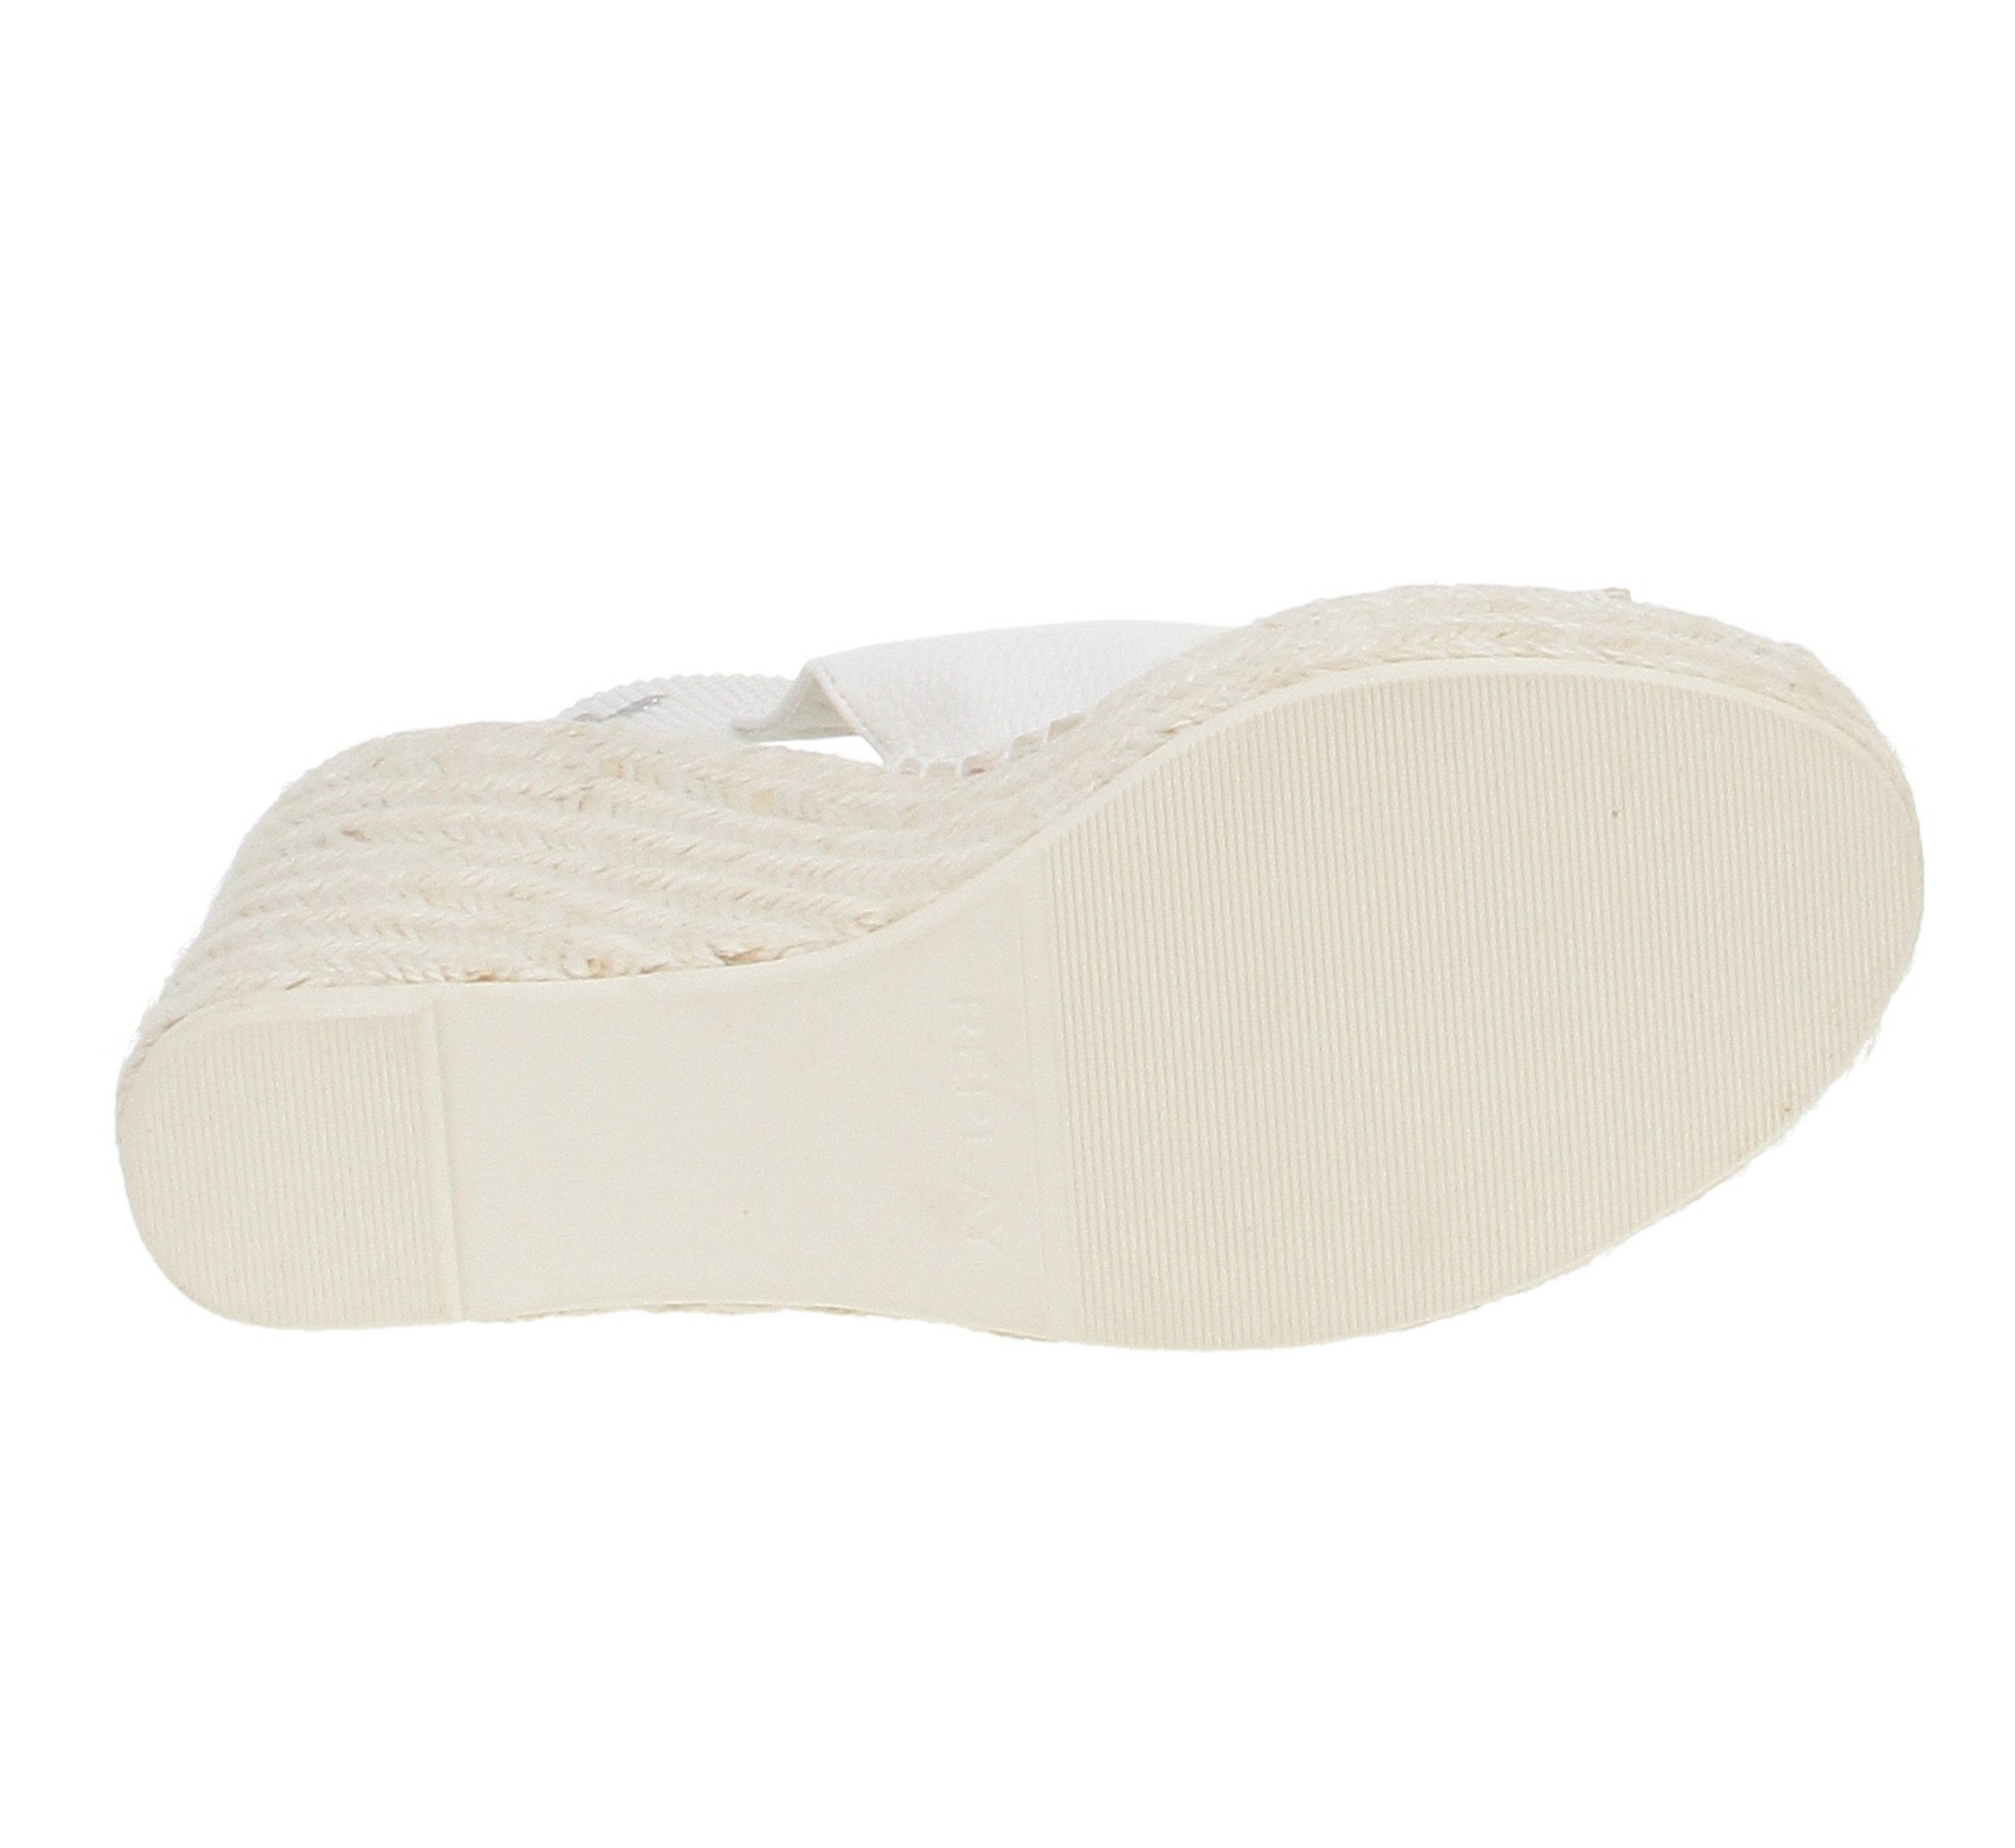 Replay GWP4G C0008S-White-36 Sandale